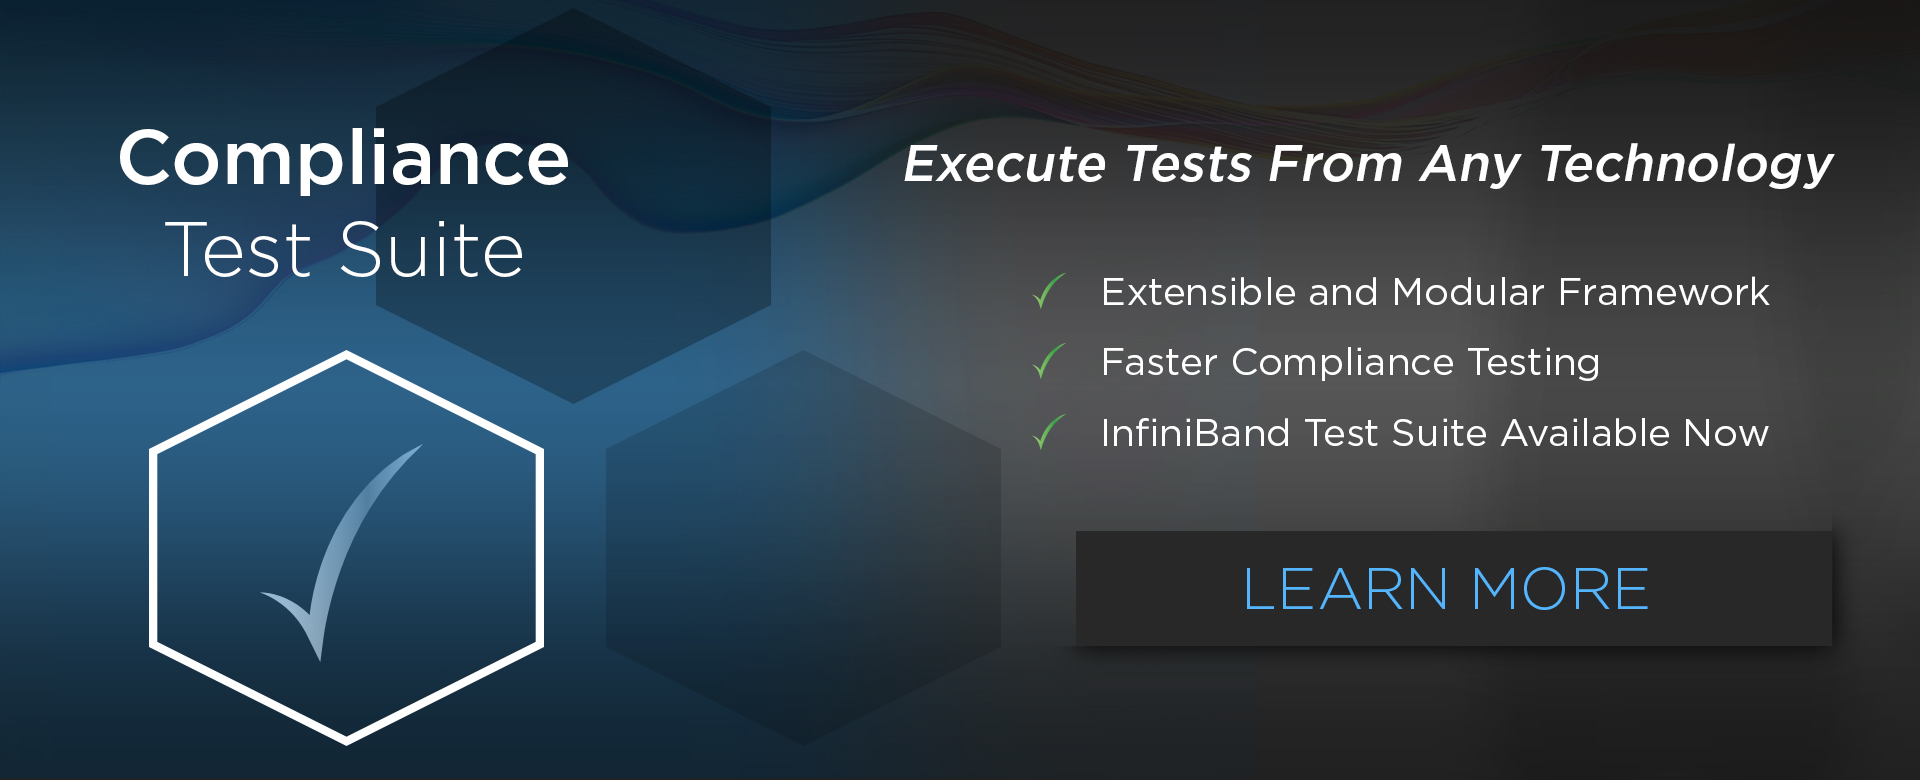 Compliance Test Suite for InfiniBand Testing